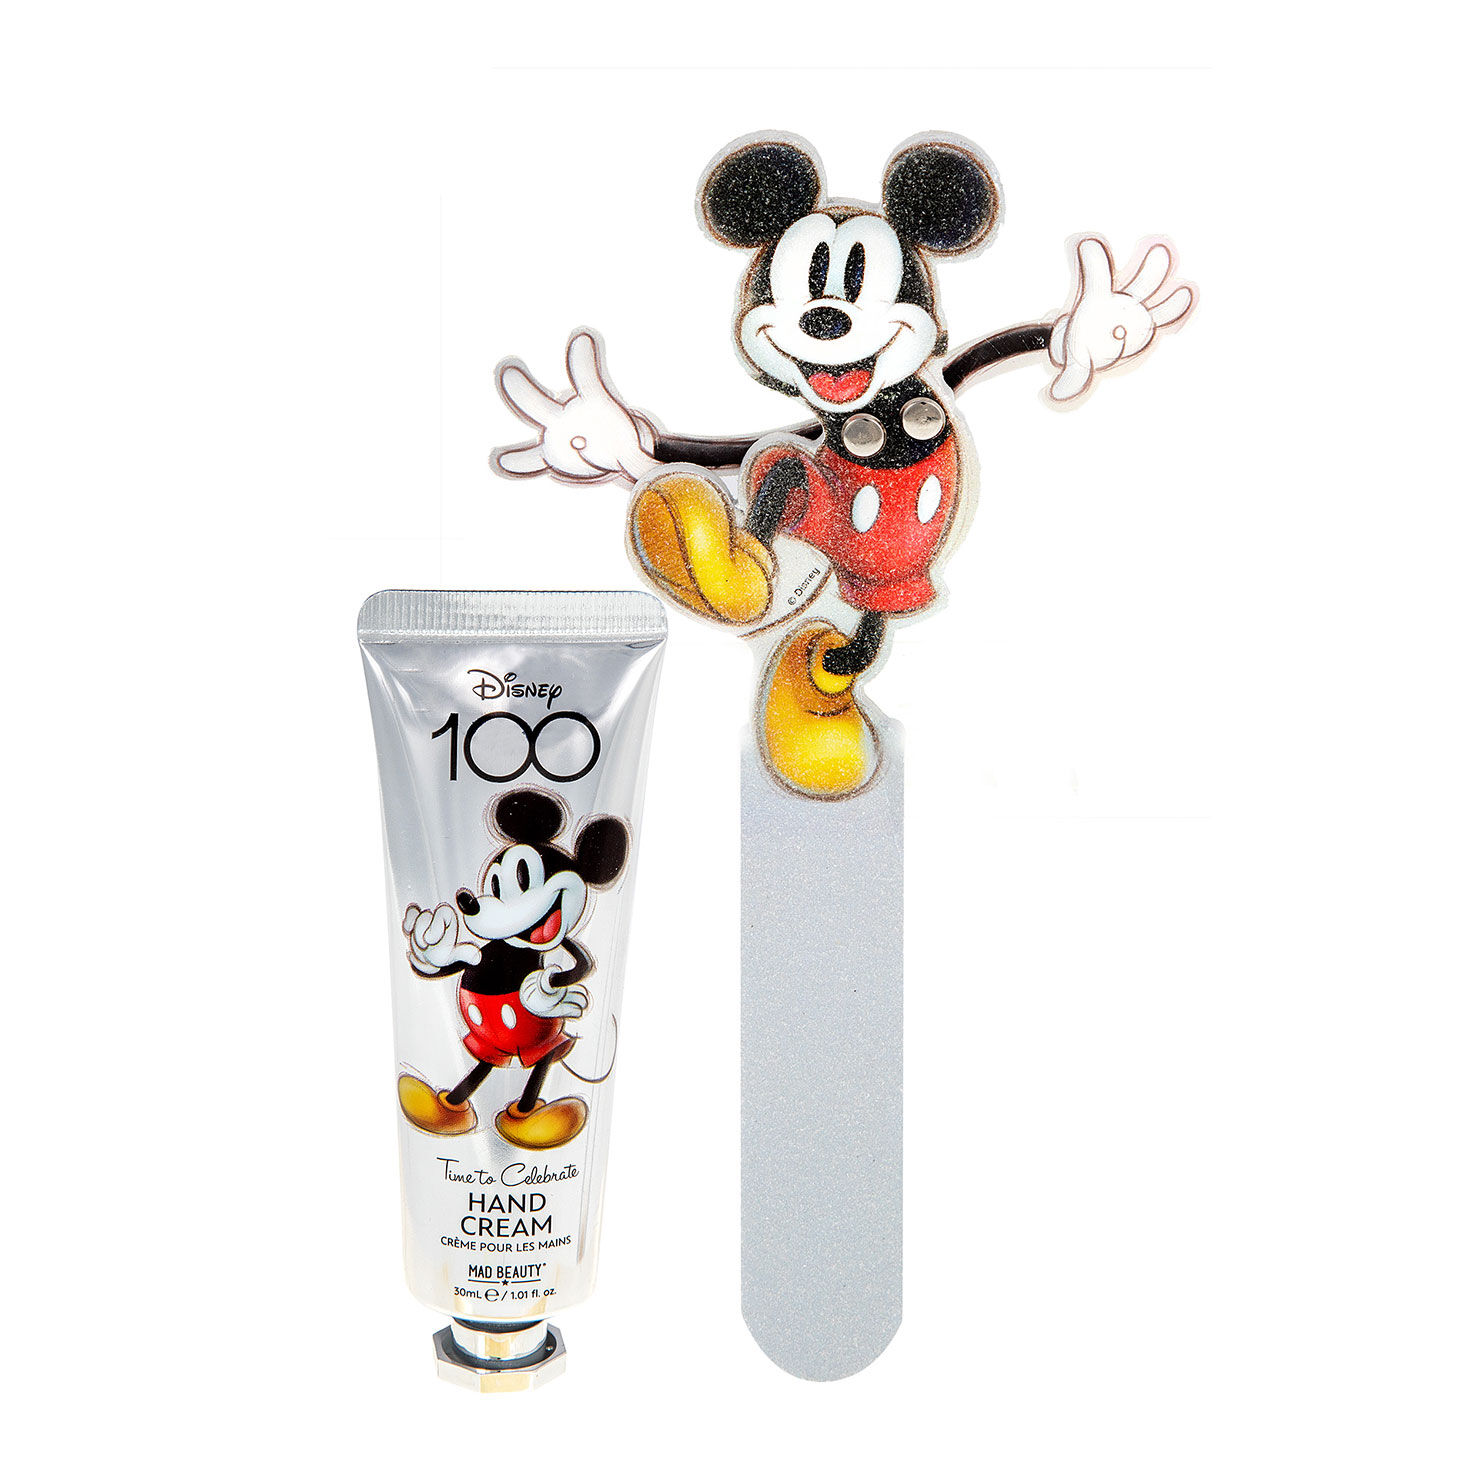 Disney Mickey Mouse Bottled Water, Natural Spring Water